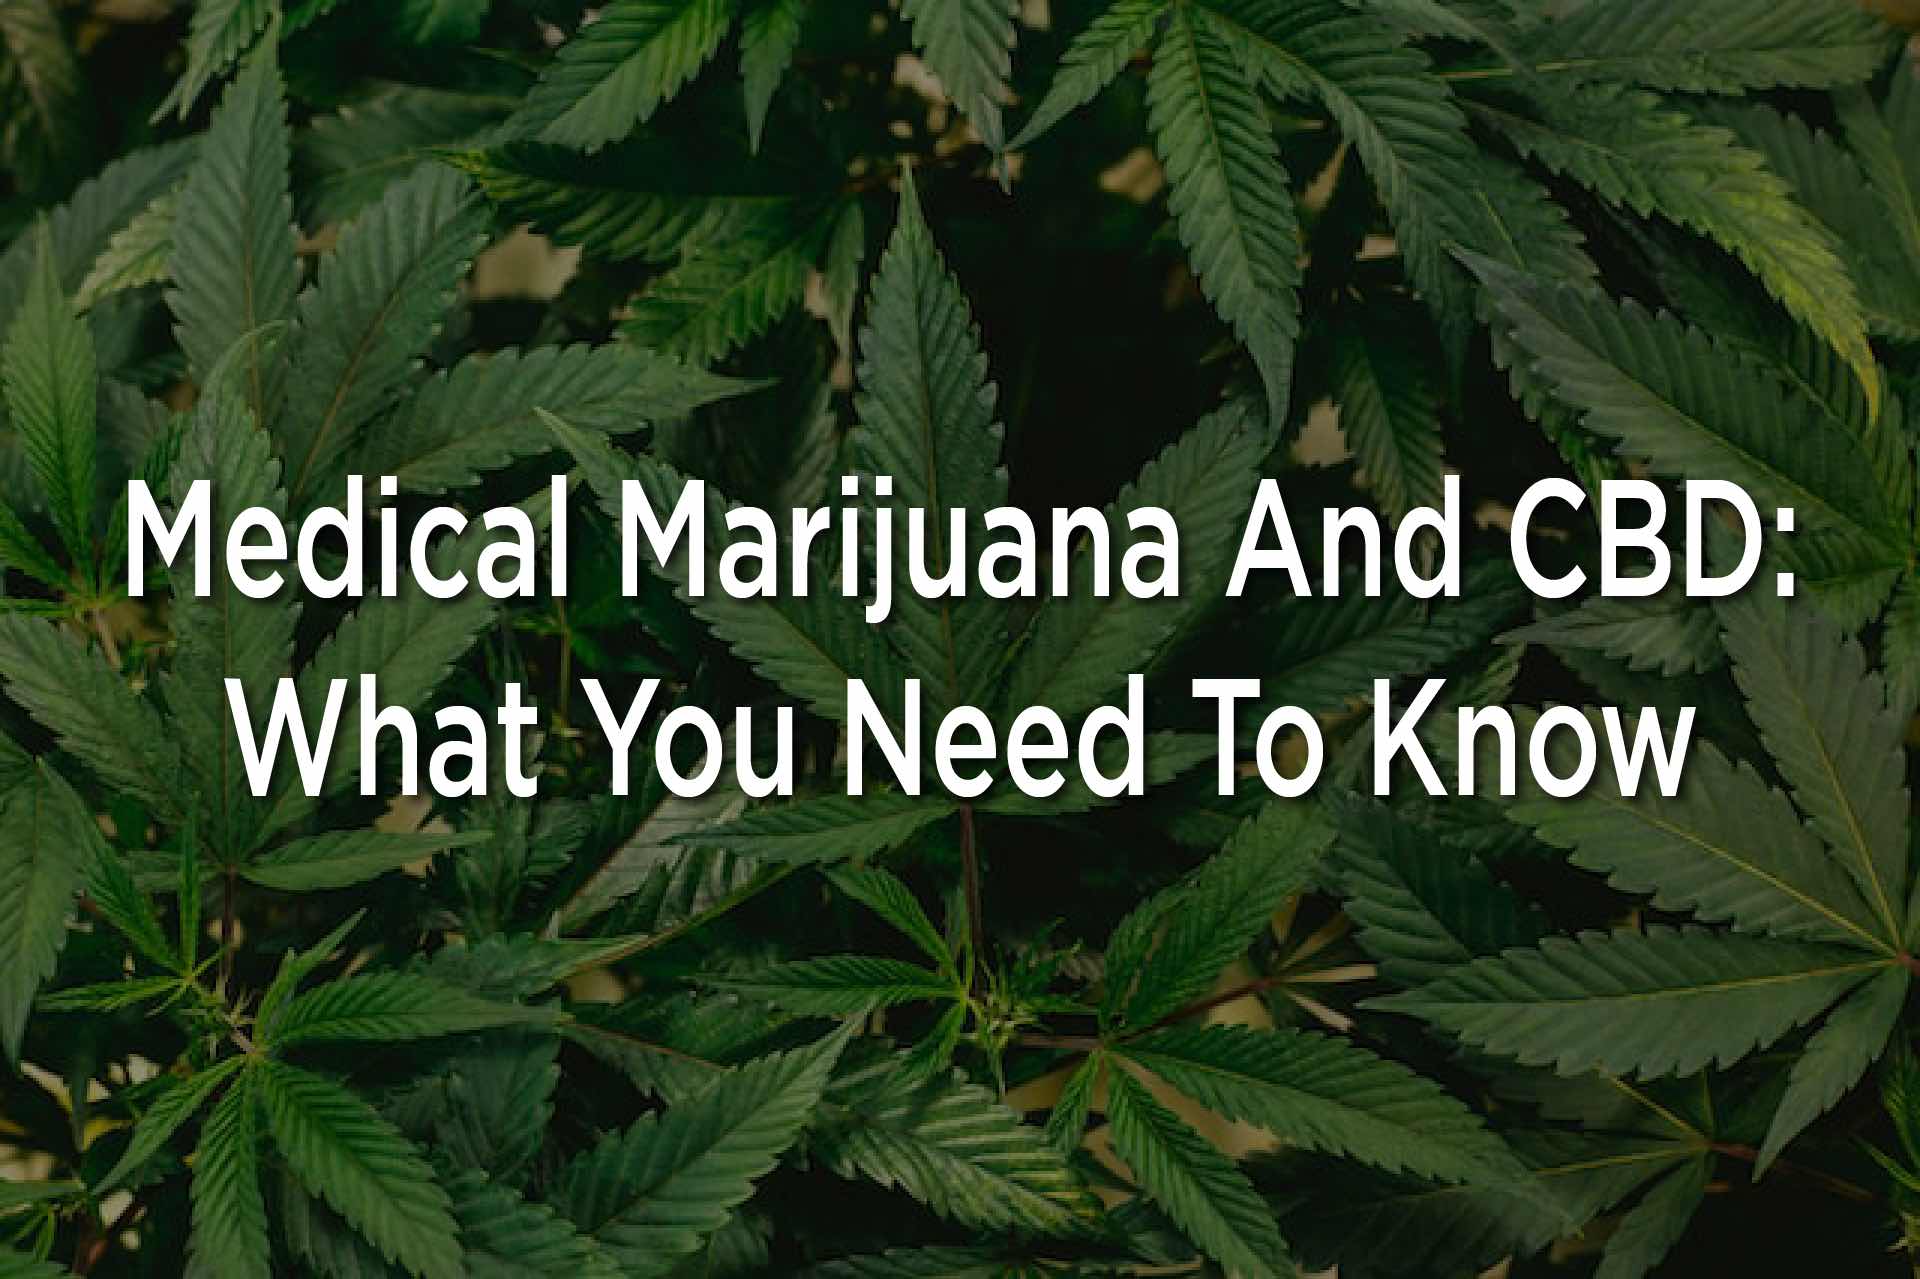 Medical Marijuana And CBD: What You Need To Know